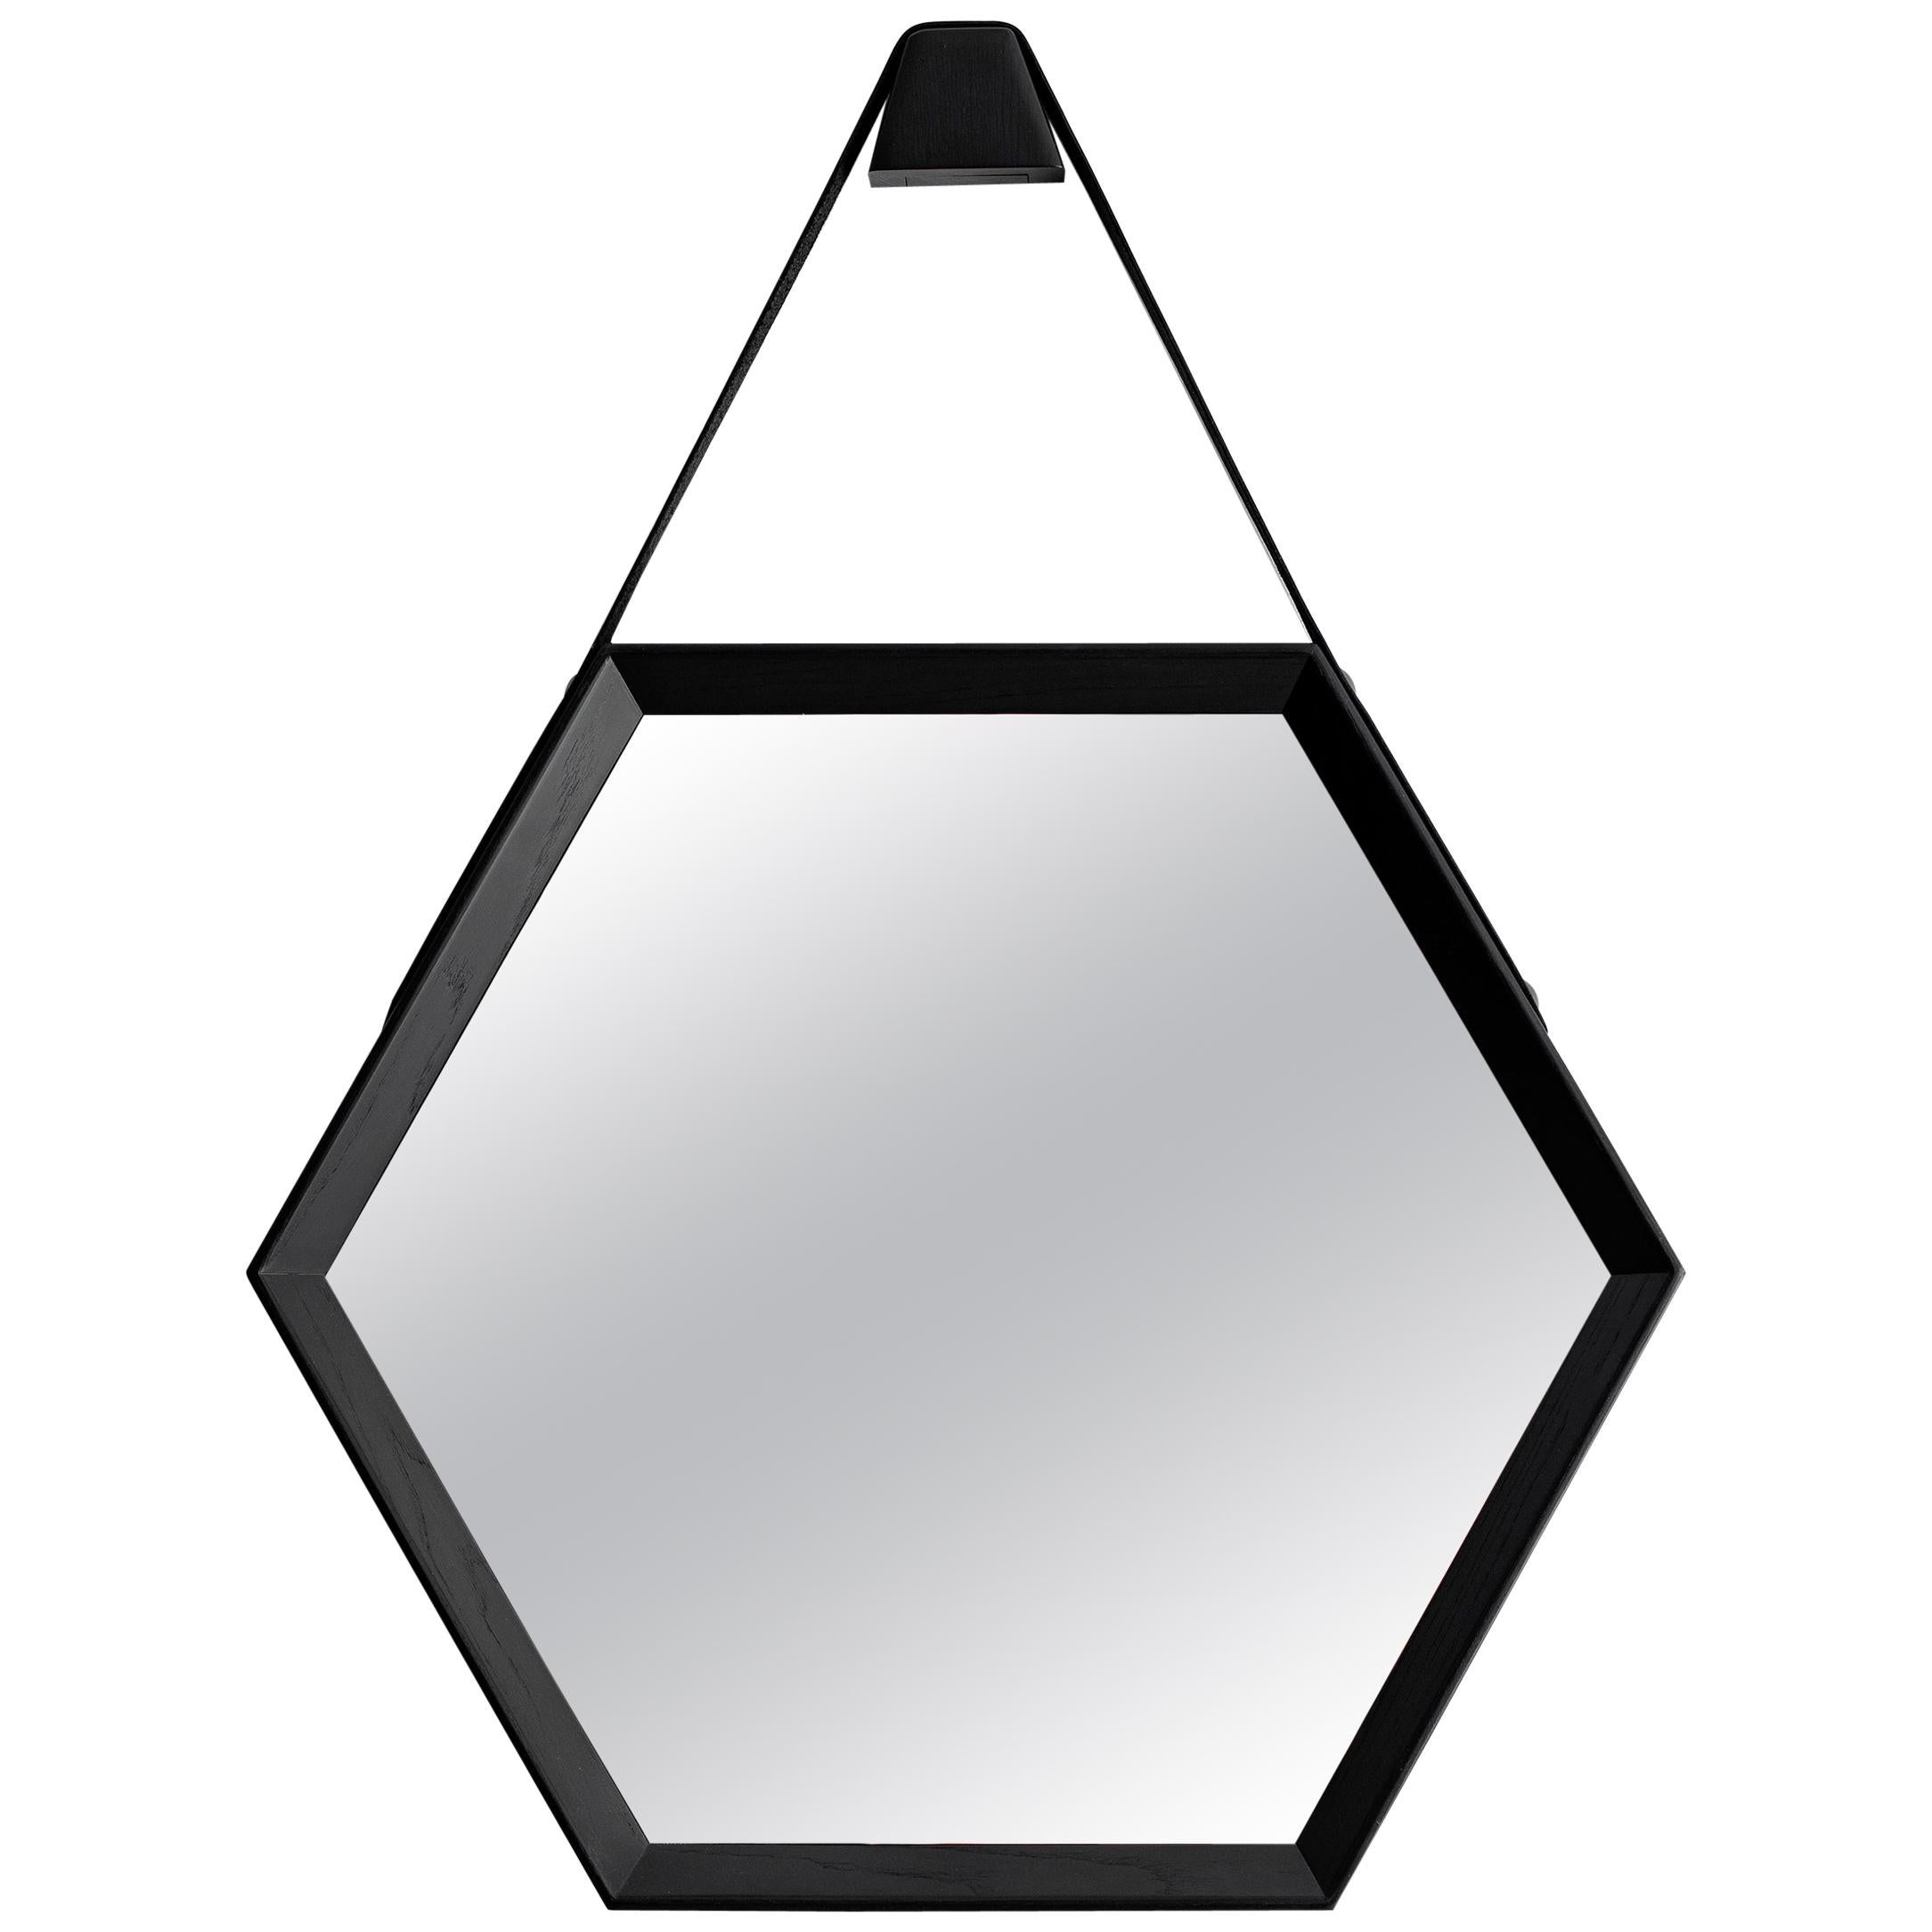 Beverly Oak and Leather Hexagon Mirror by Orange Los Angeles